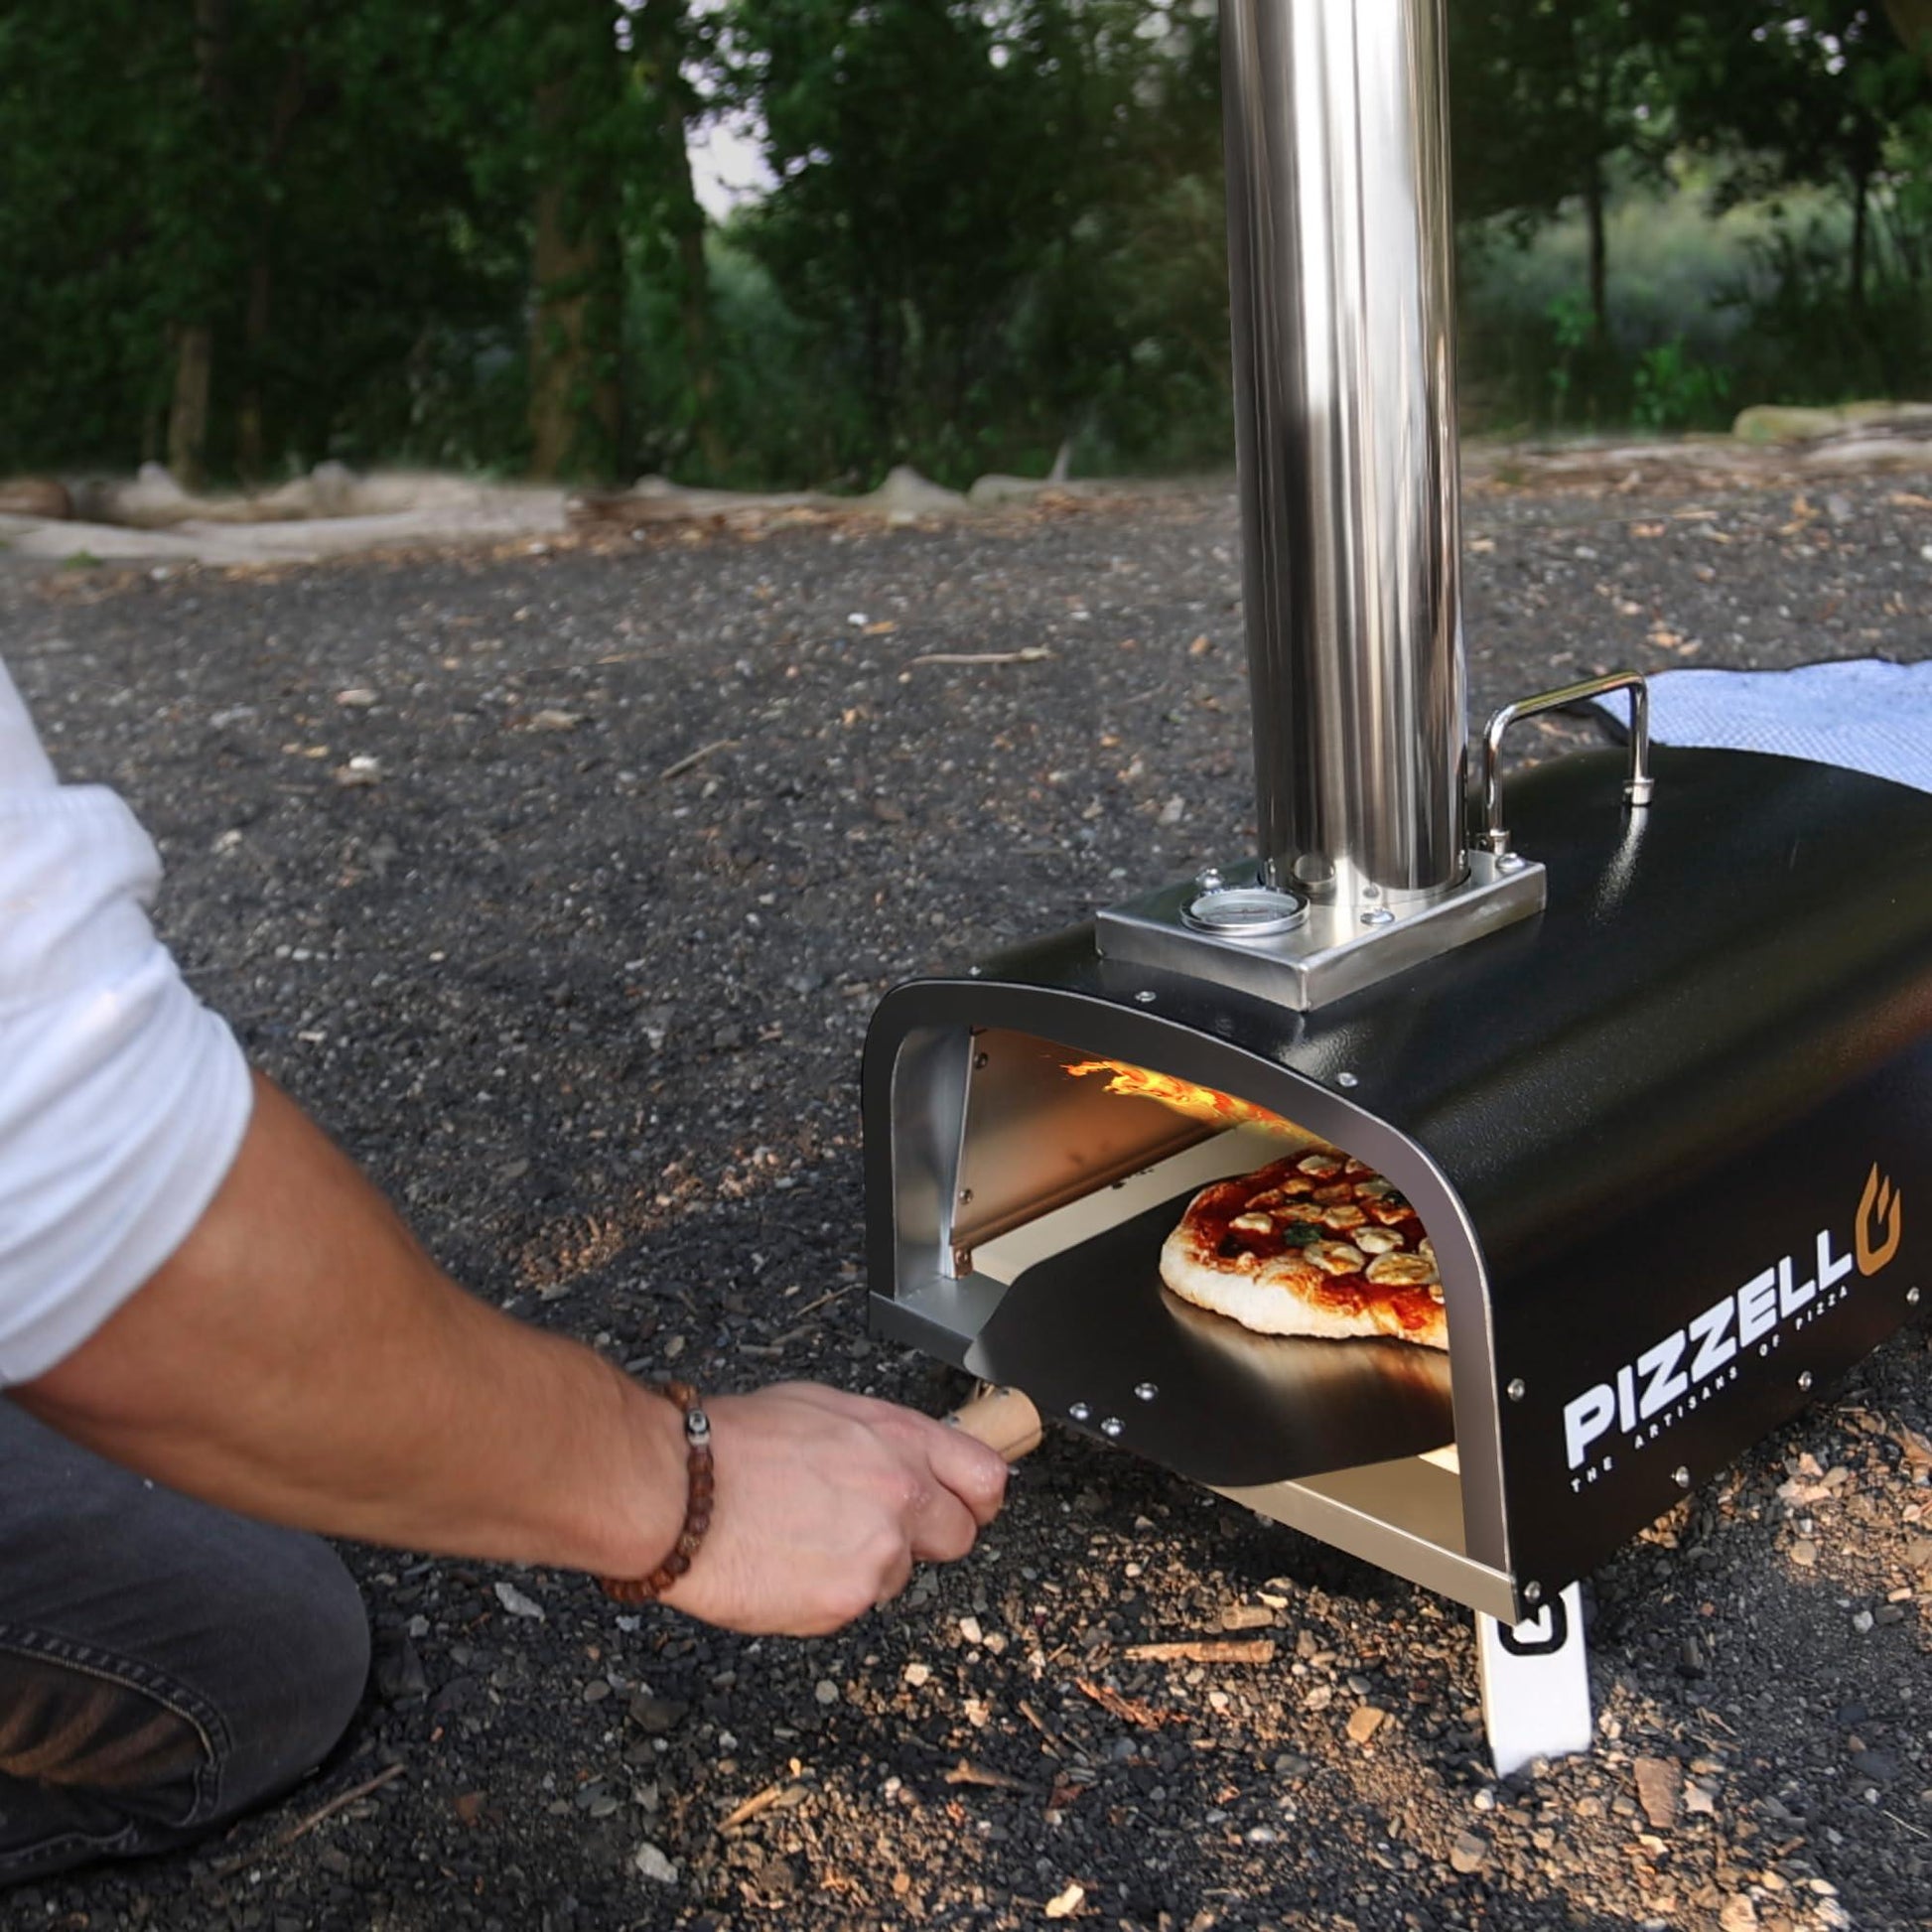 PIZZELLO Portable Pellet Pizza Oven Outdoor Wood Fired Pizza Ovens Included Pizza Stone, Pizza Peel, Fold-up Legs, Cover, Pizzello Forte (Black) - CookCave